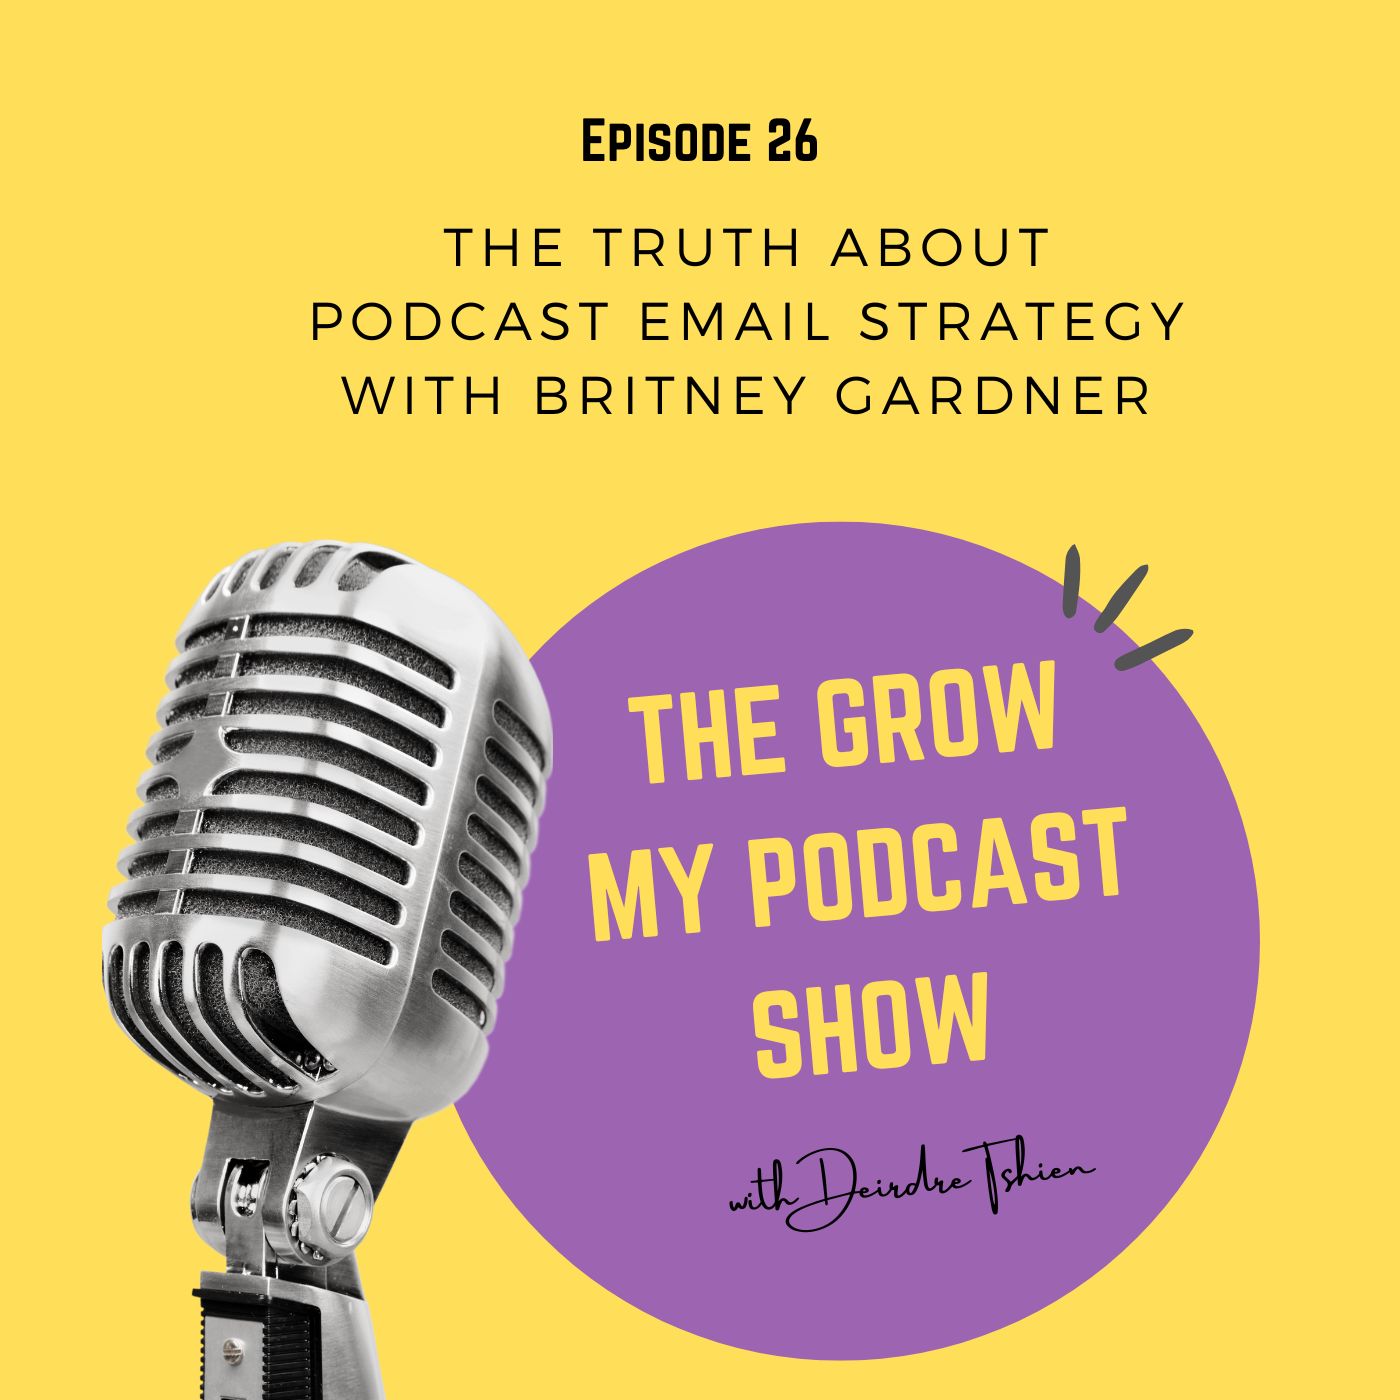 The Truth About Podcast Email Strategy with Britney Gardner Image